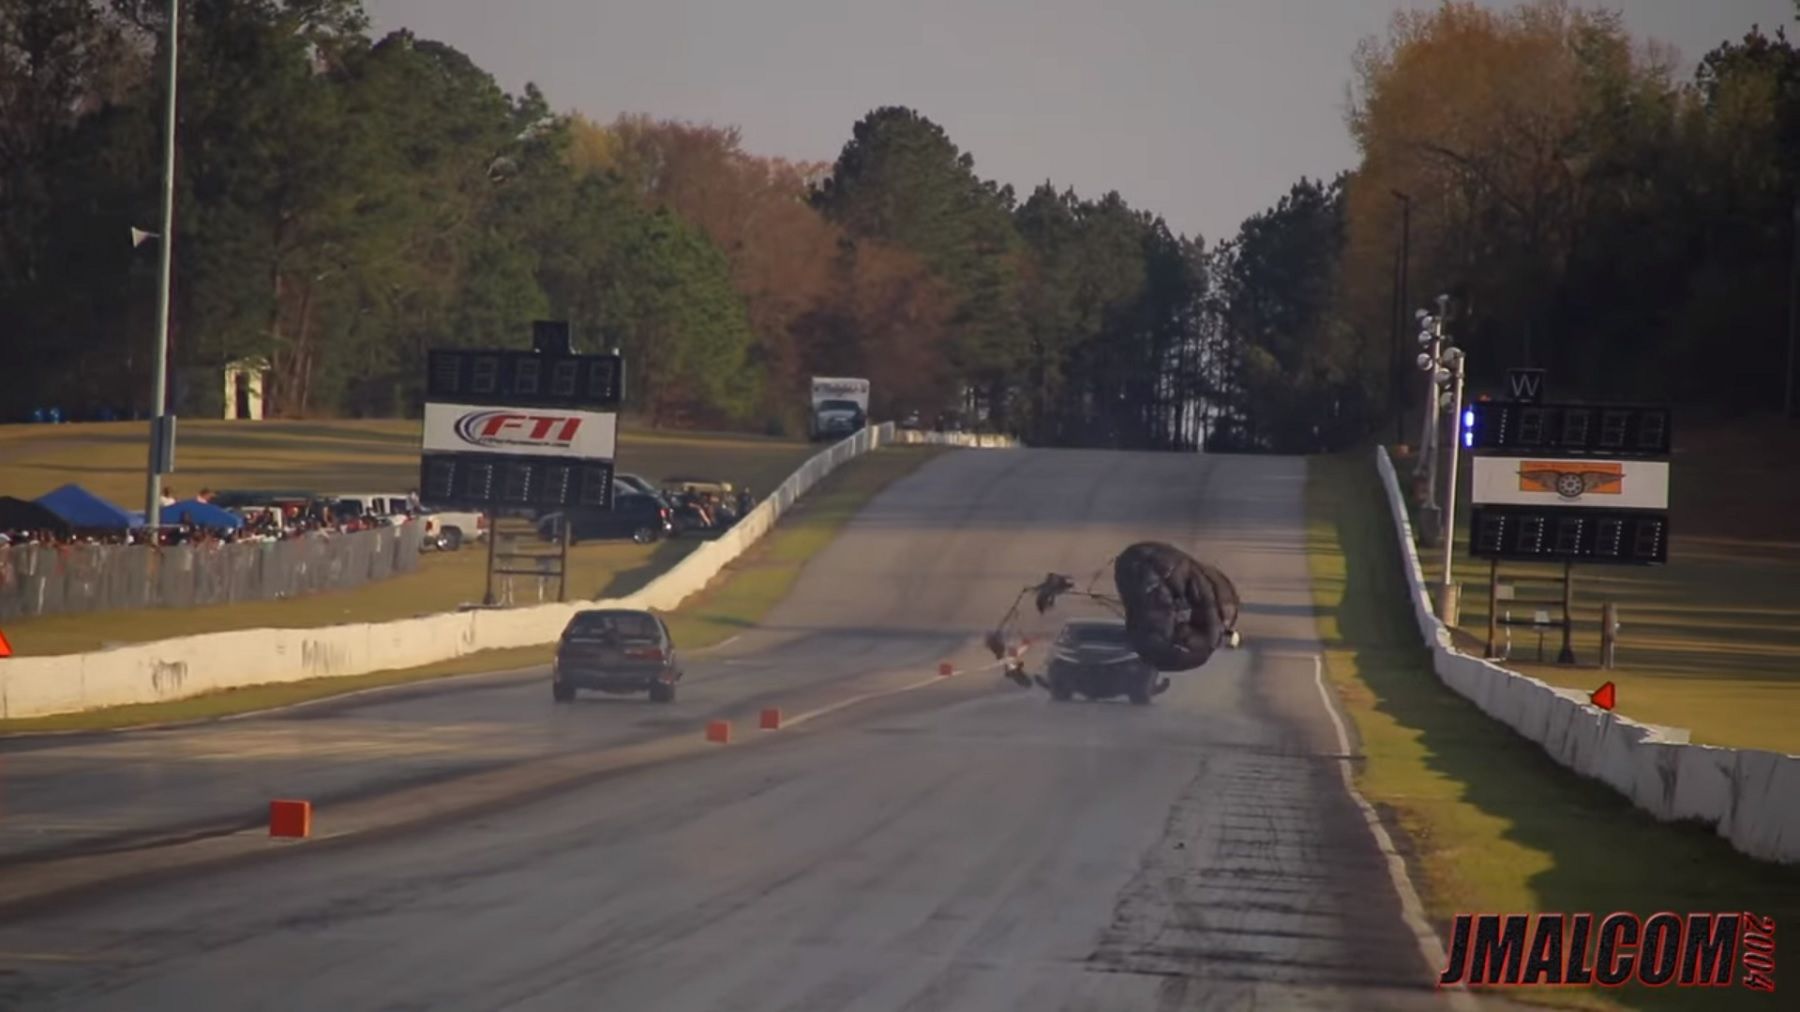 Chevrolet Malibu Drag Racer, rear from distance, parachute falls off